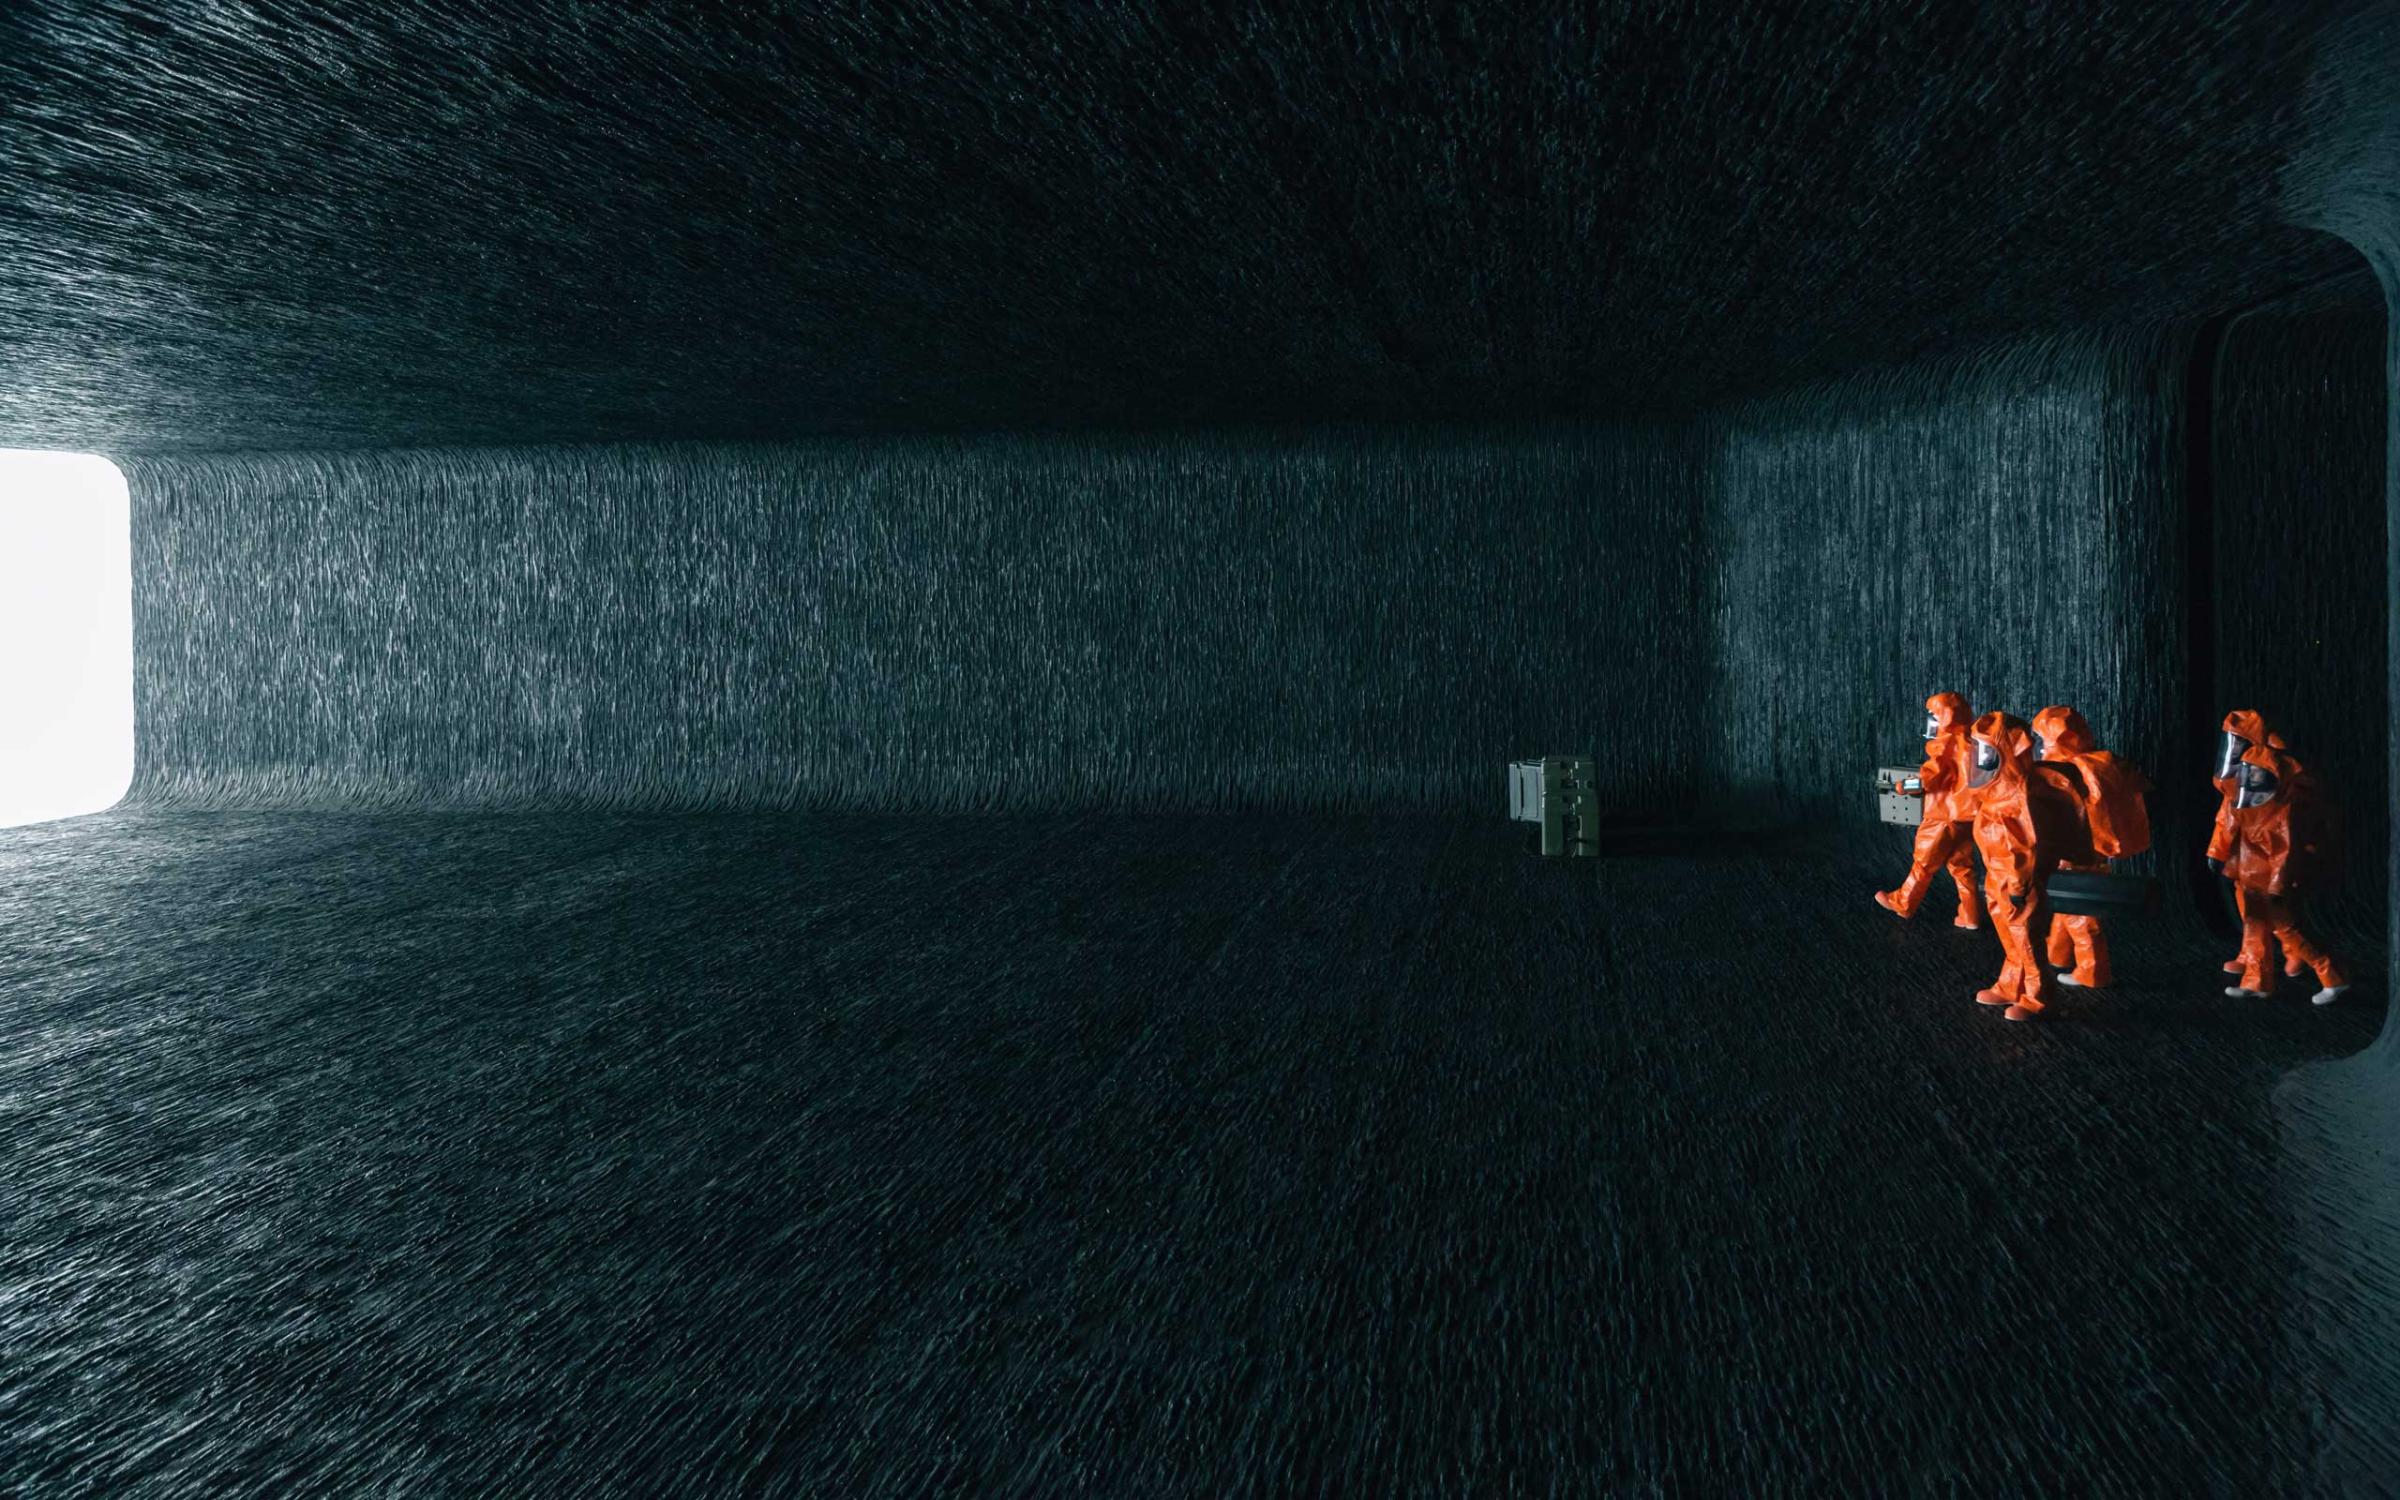 A scene inside the spaceship's chamber from the film "Arrival" by Paramount Pictures